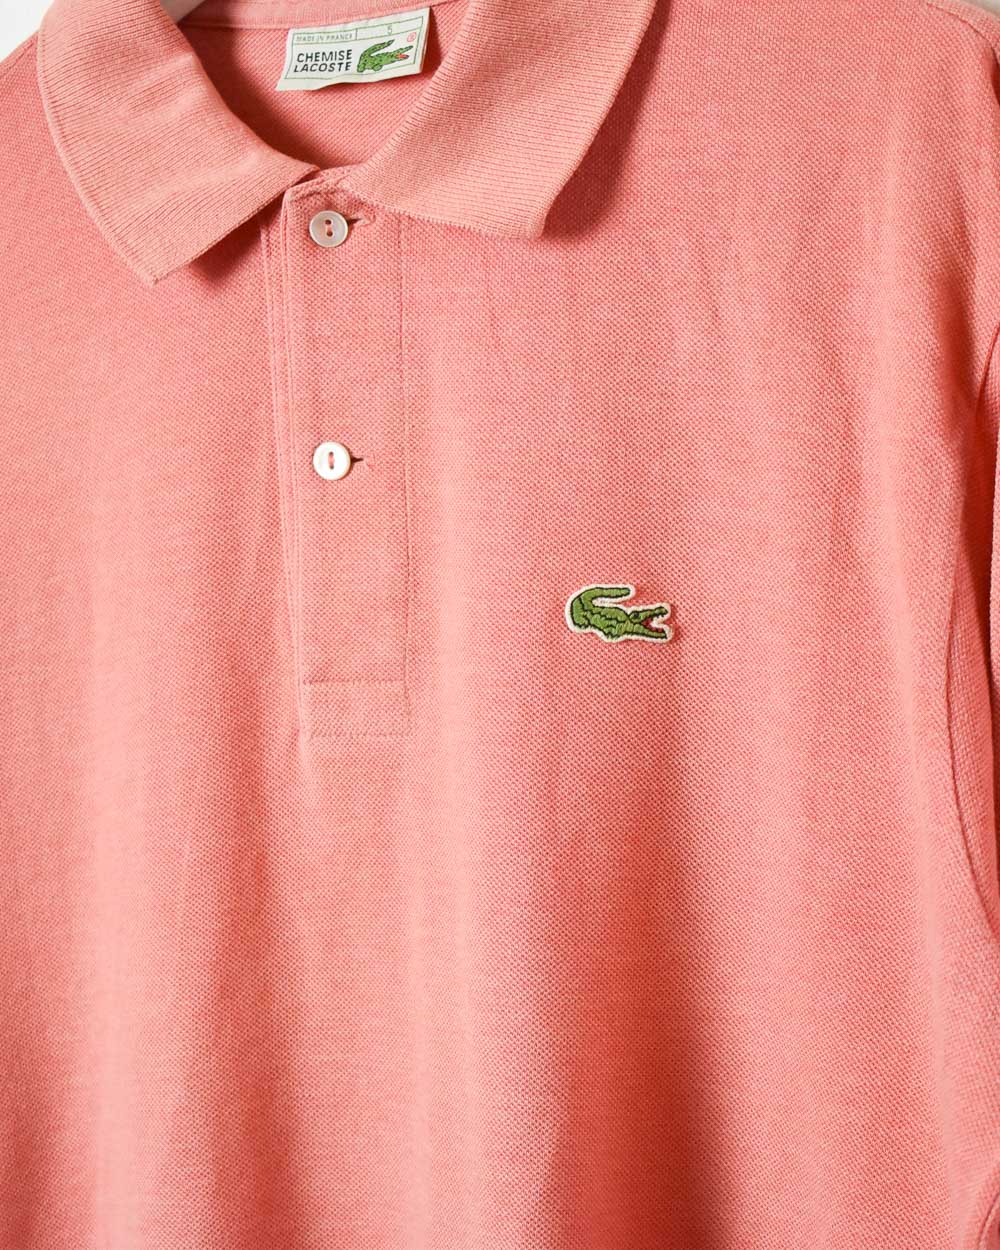 Pink Chemise Lacoste Long Sleeved Polo Shirt - Large